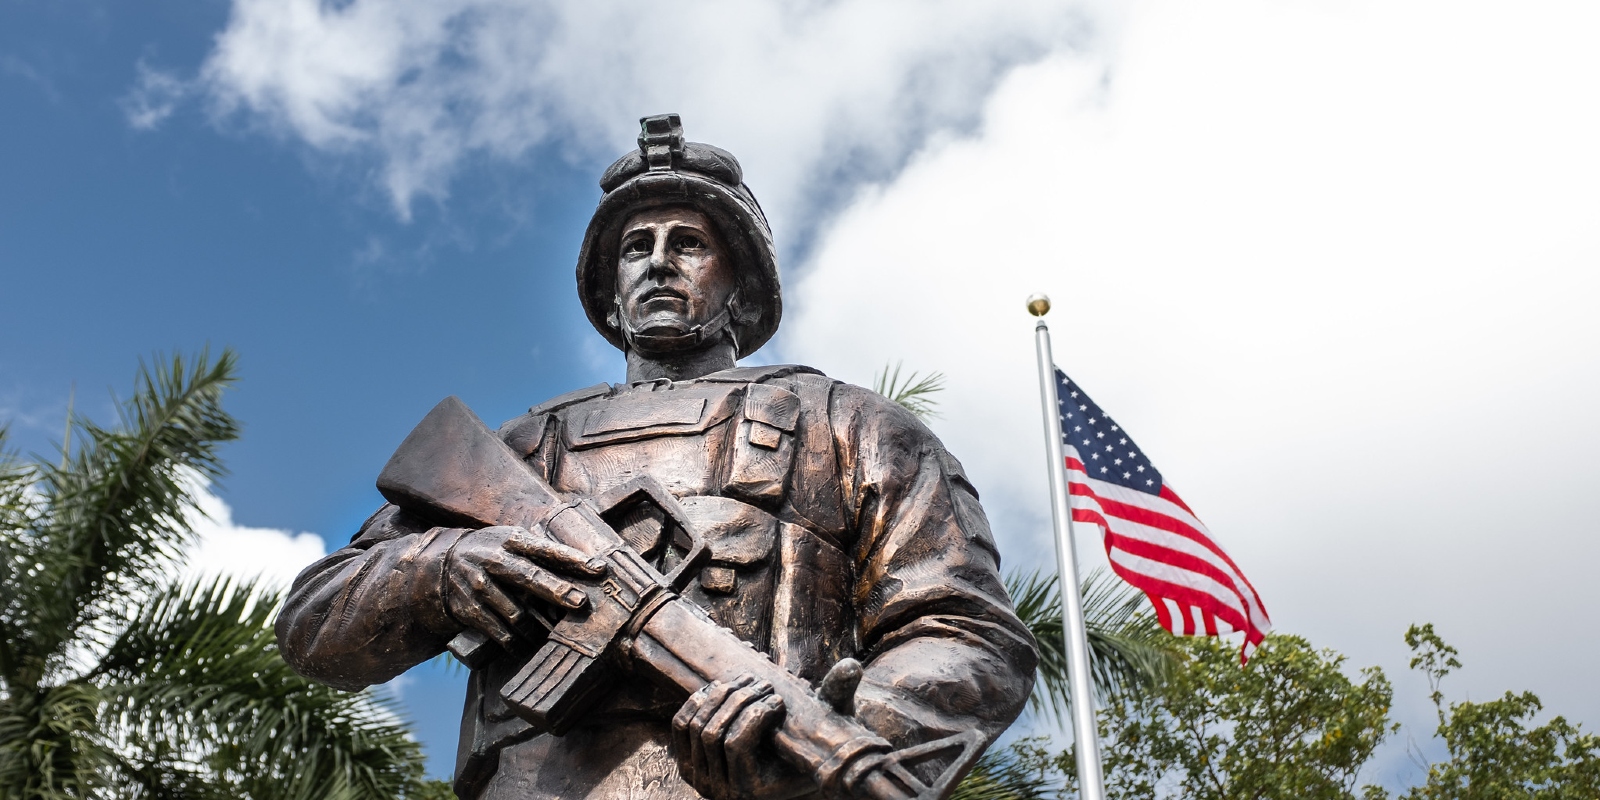 Statue of a American soldier paying homage to our nation's military. 